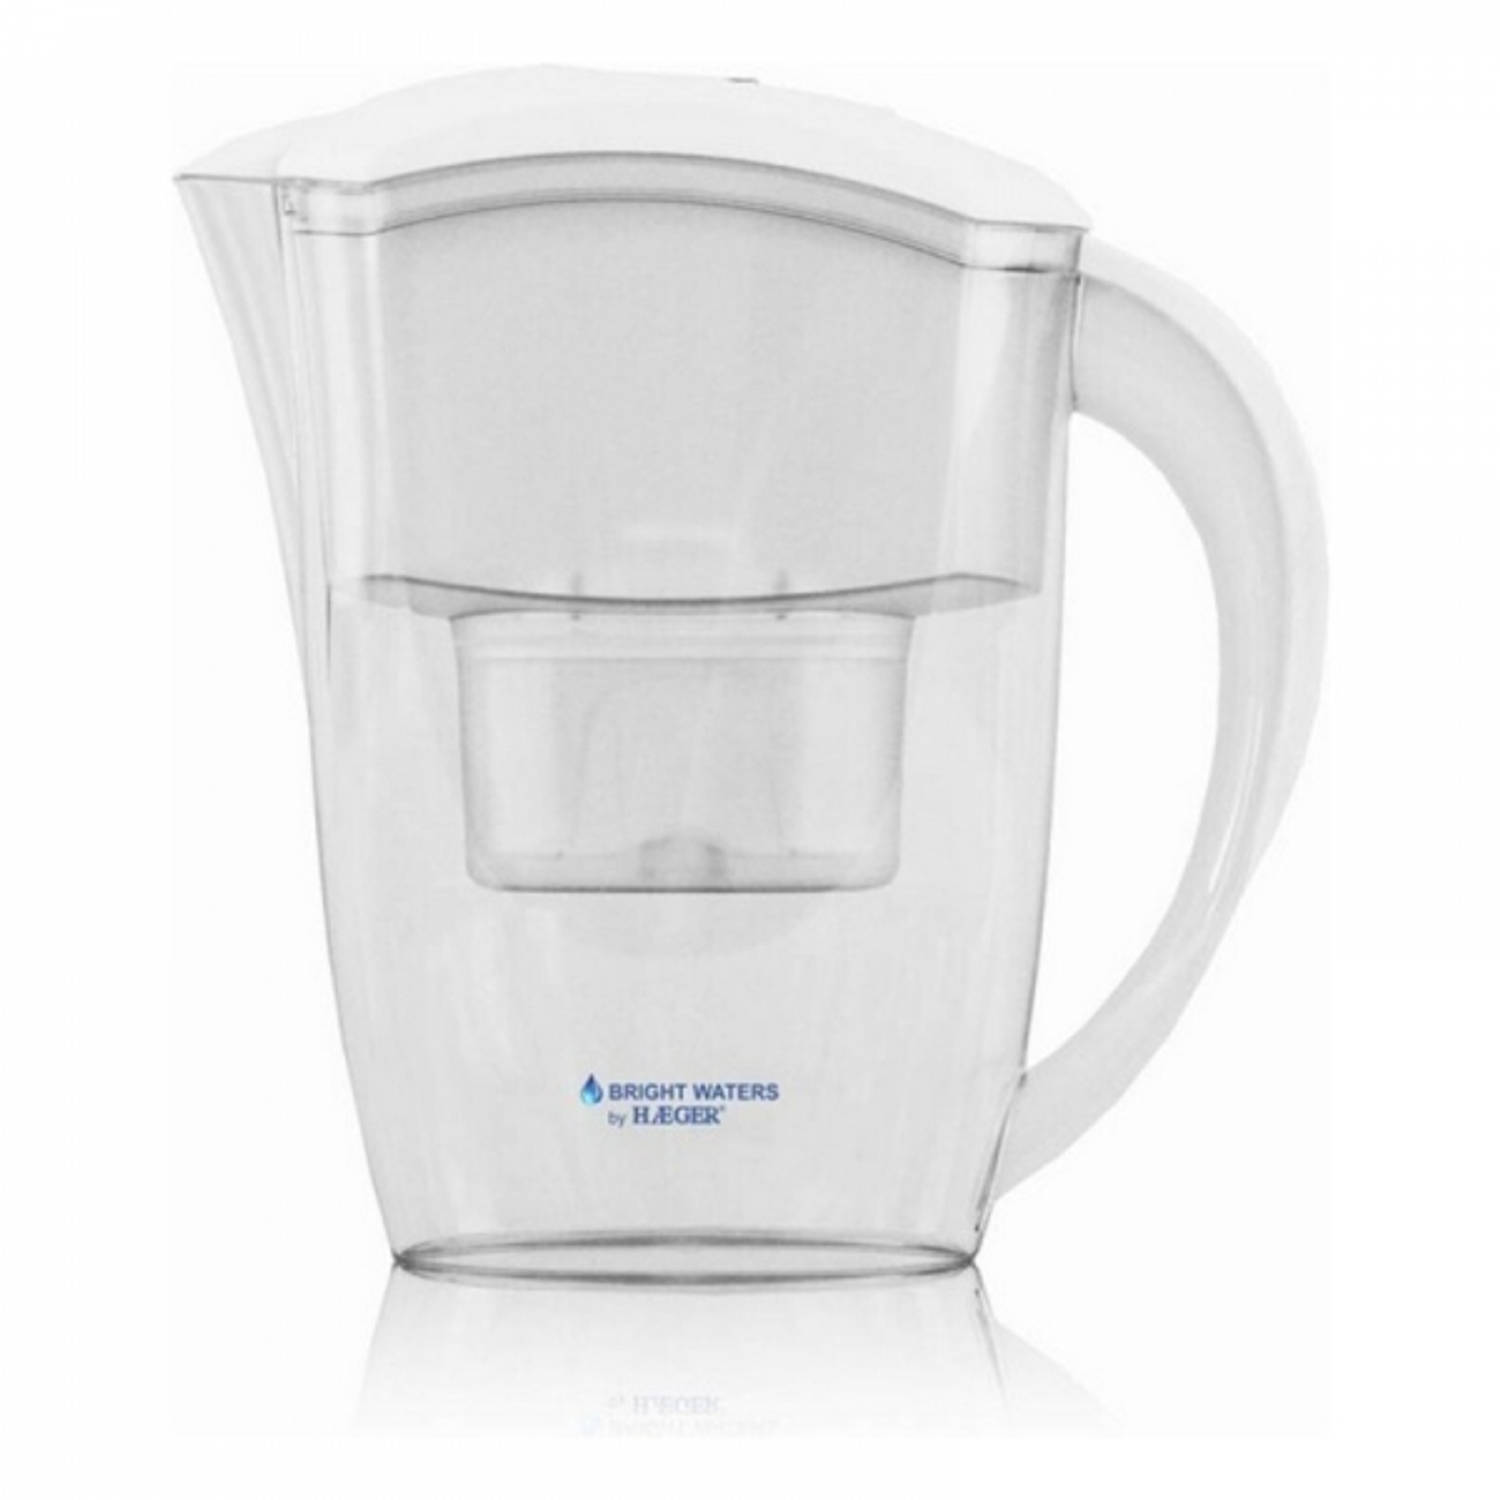 Waterfilter Haeger Bright Waters Wit 2,4 L